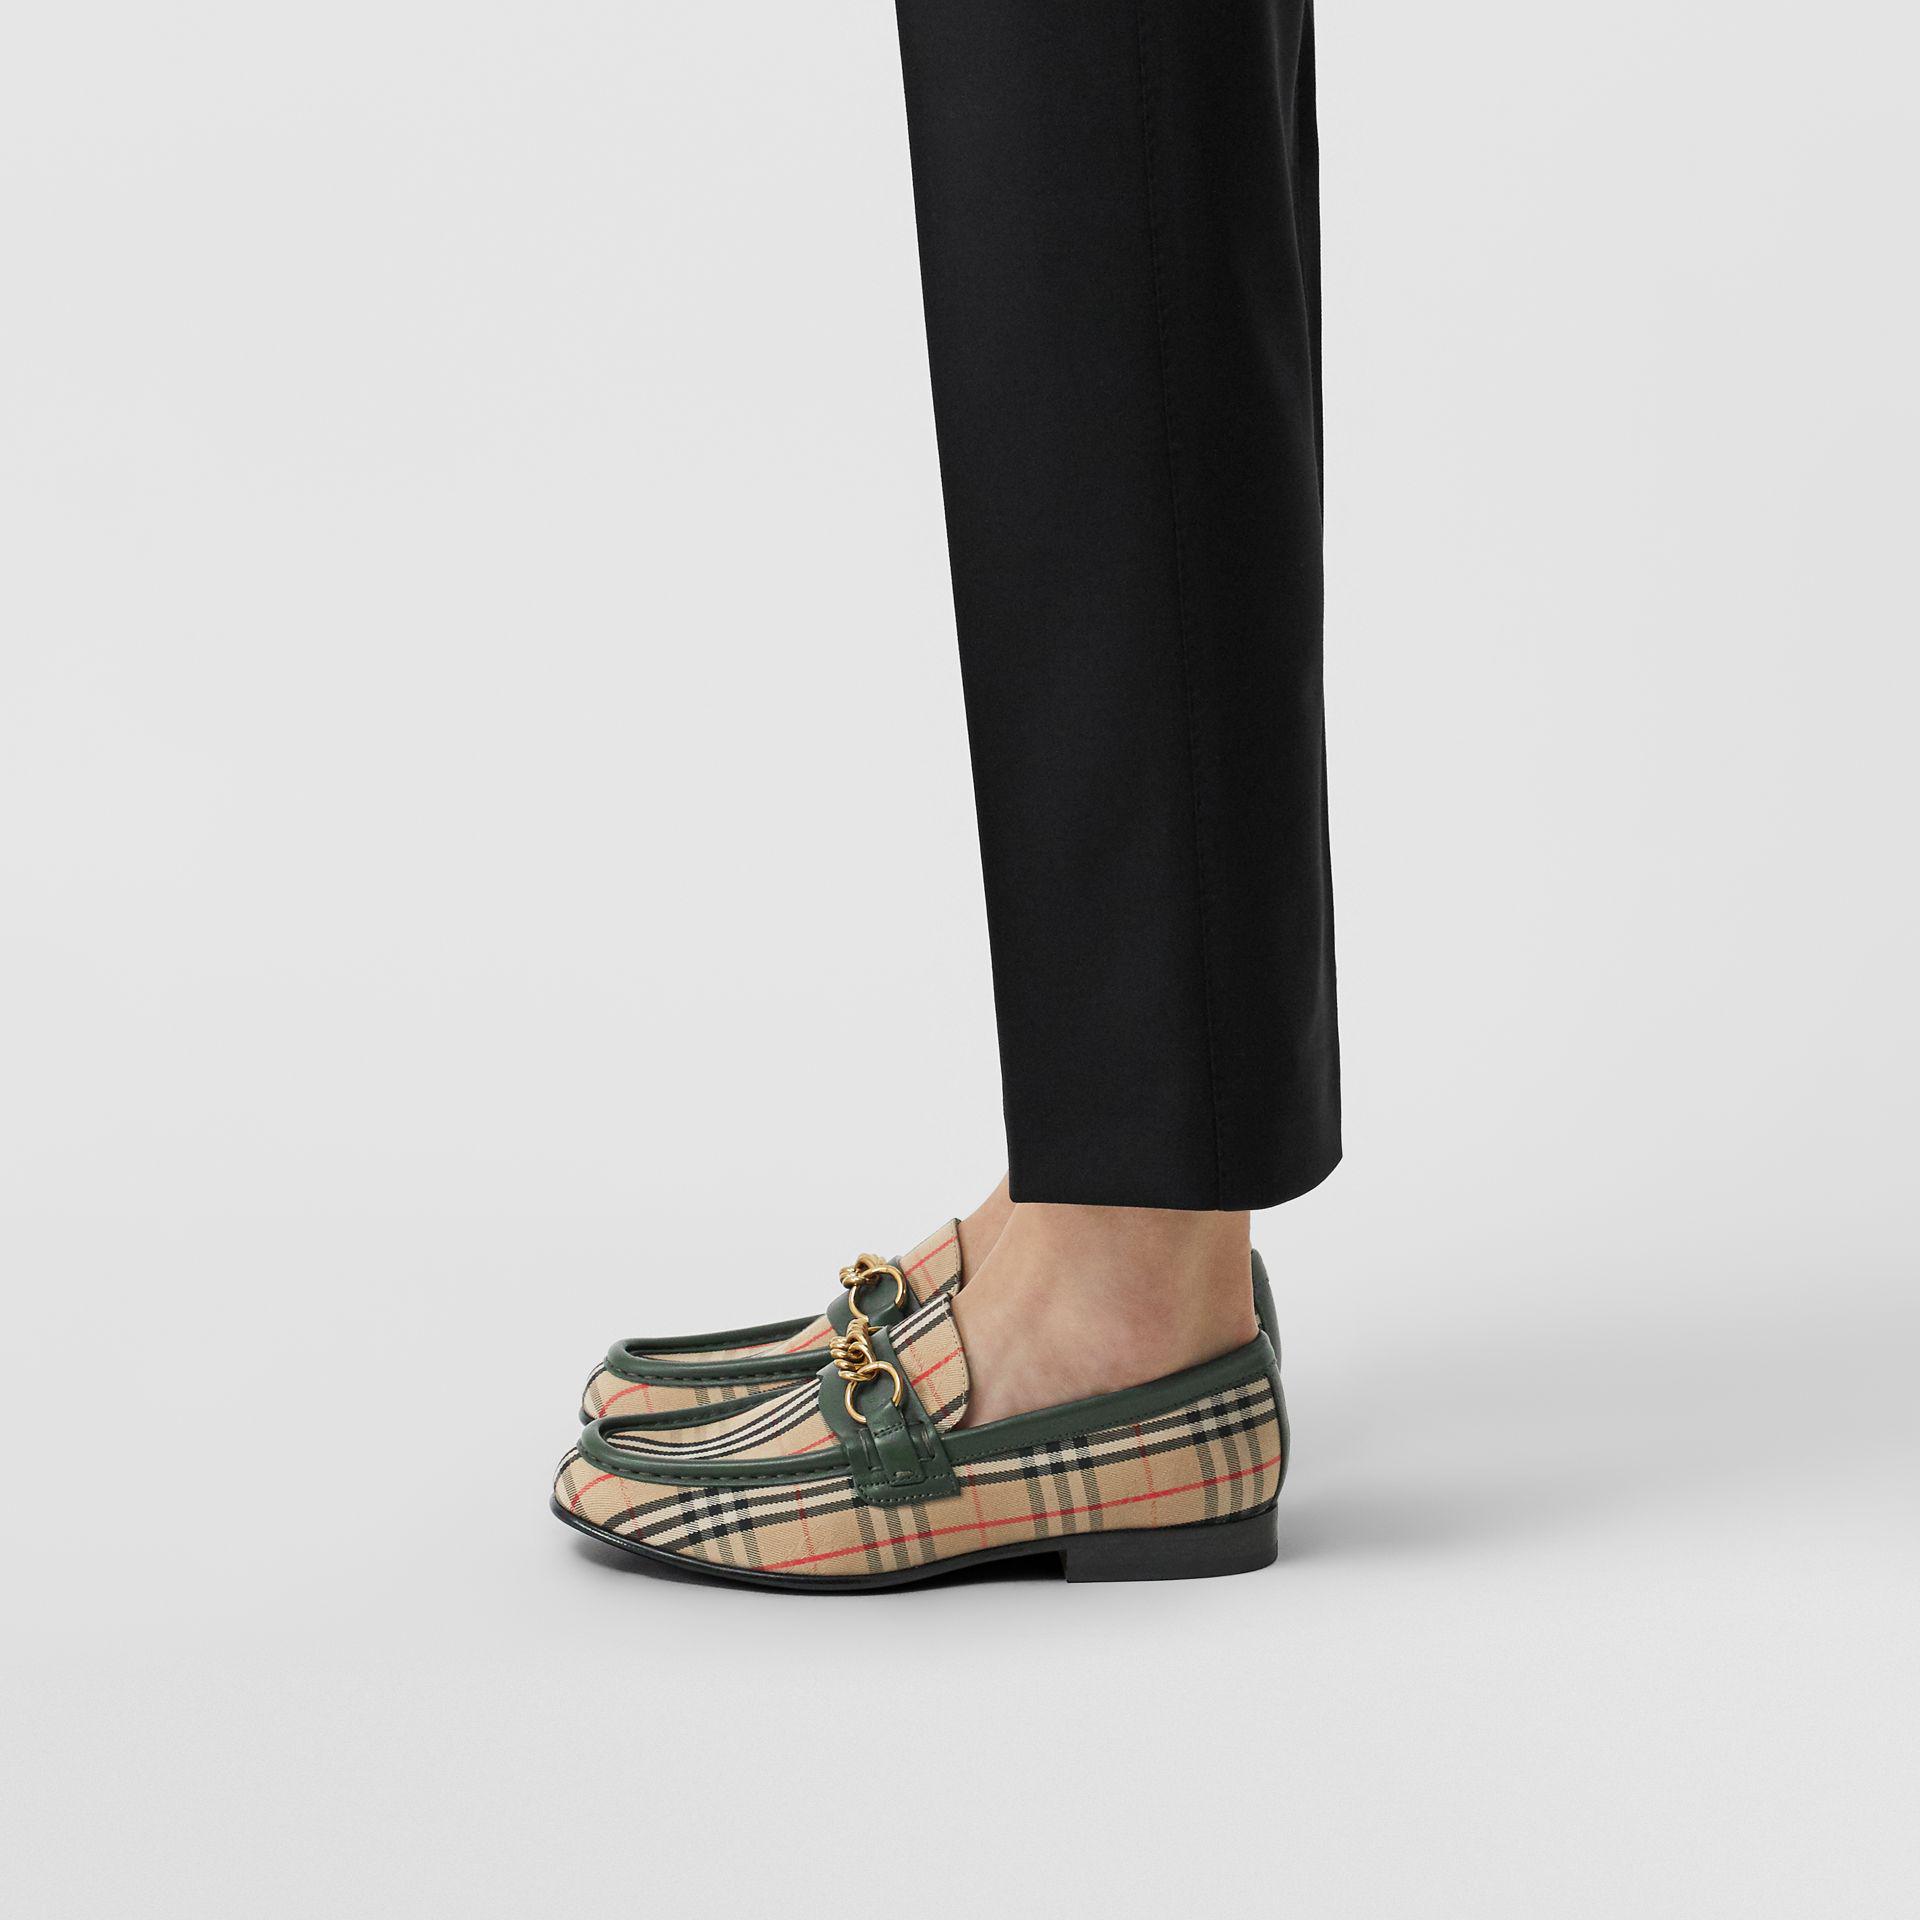 burberry the 1983 check link loafer